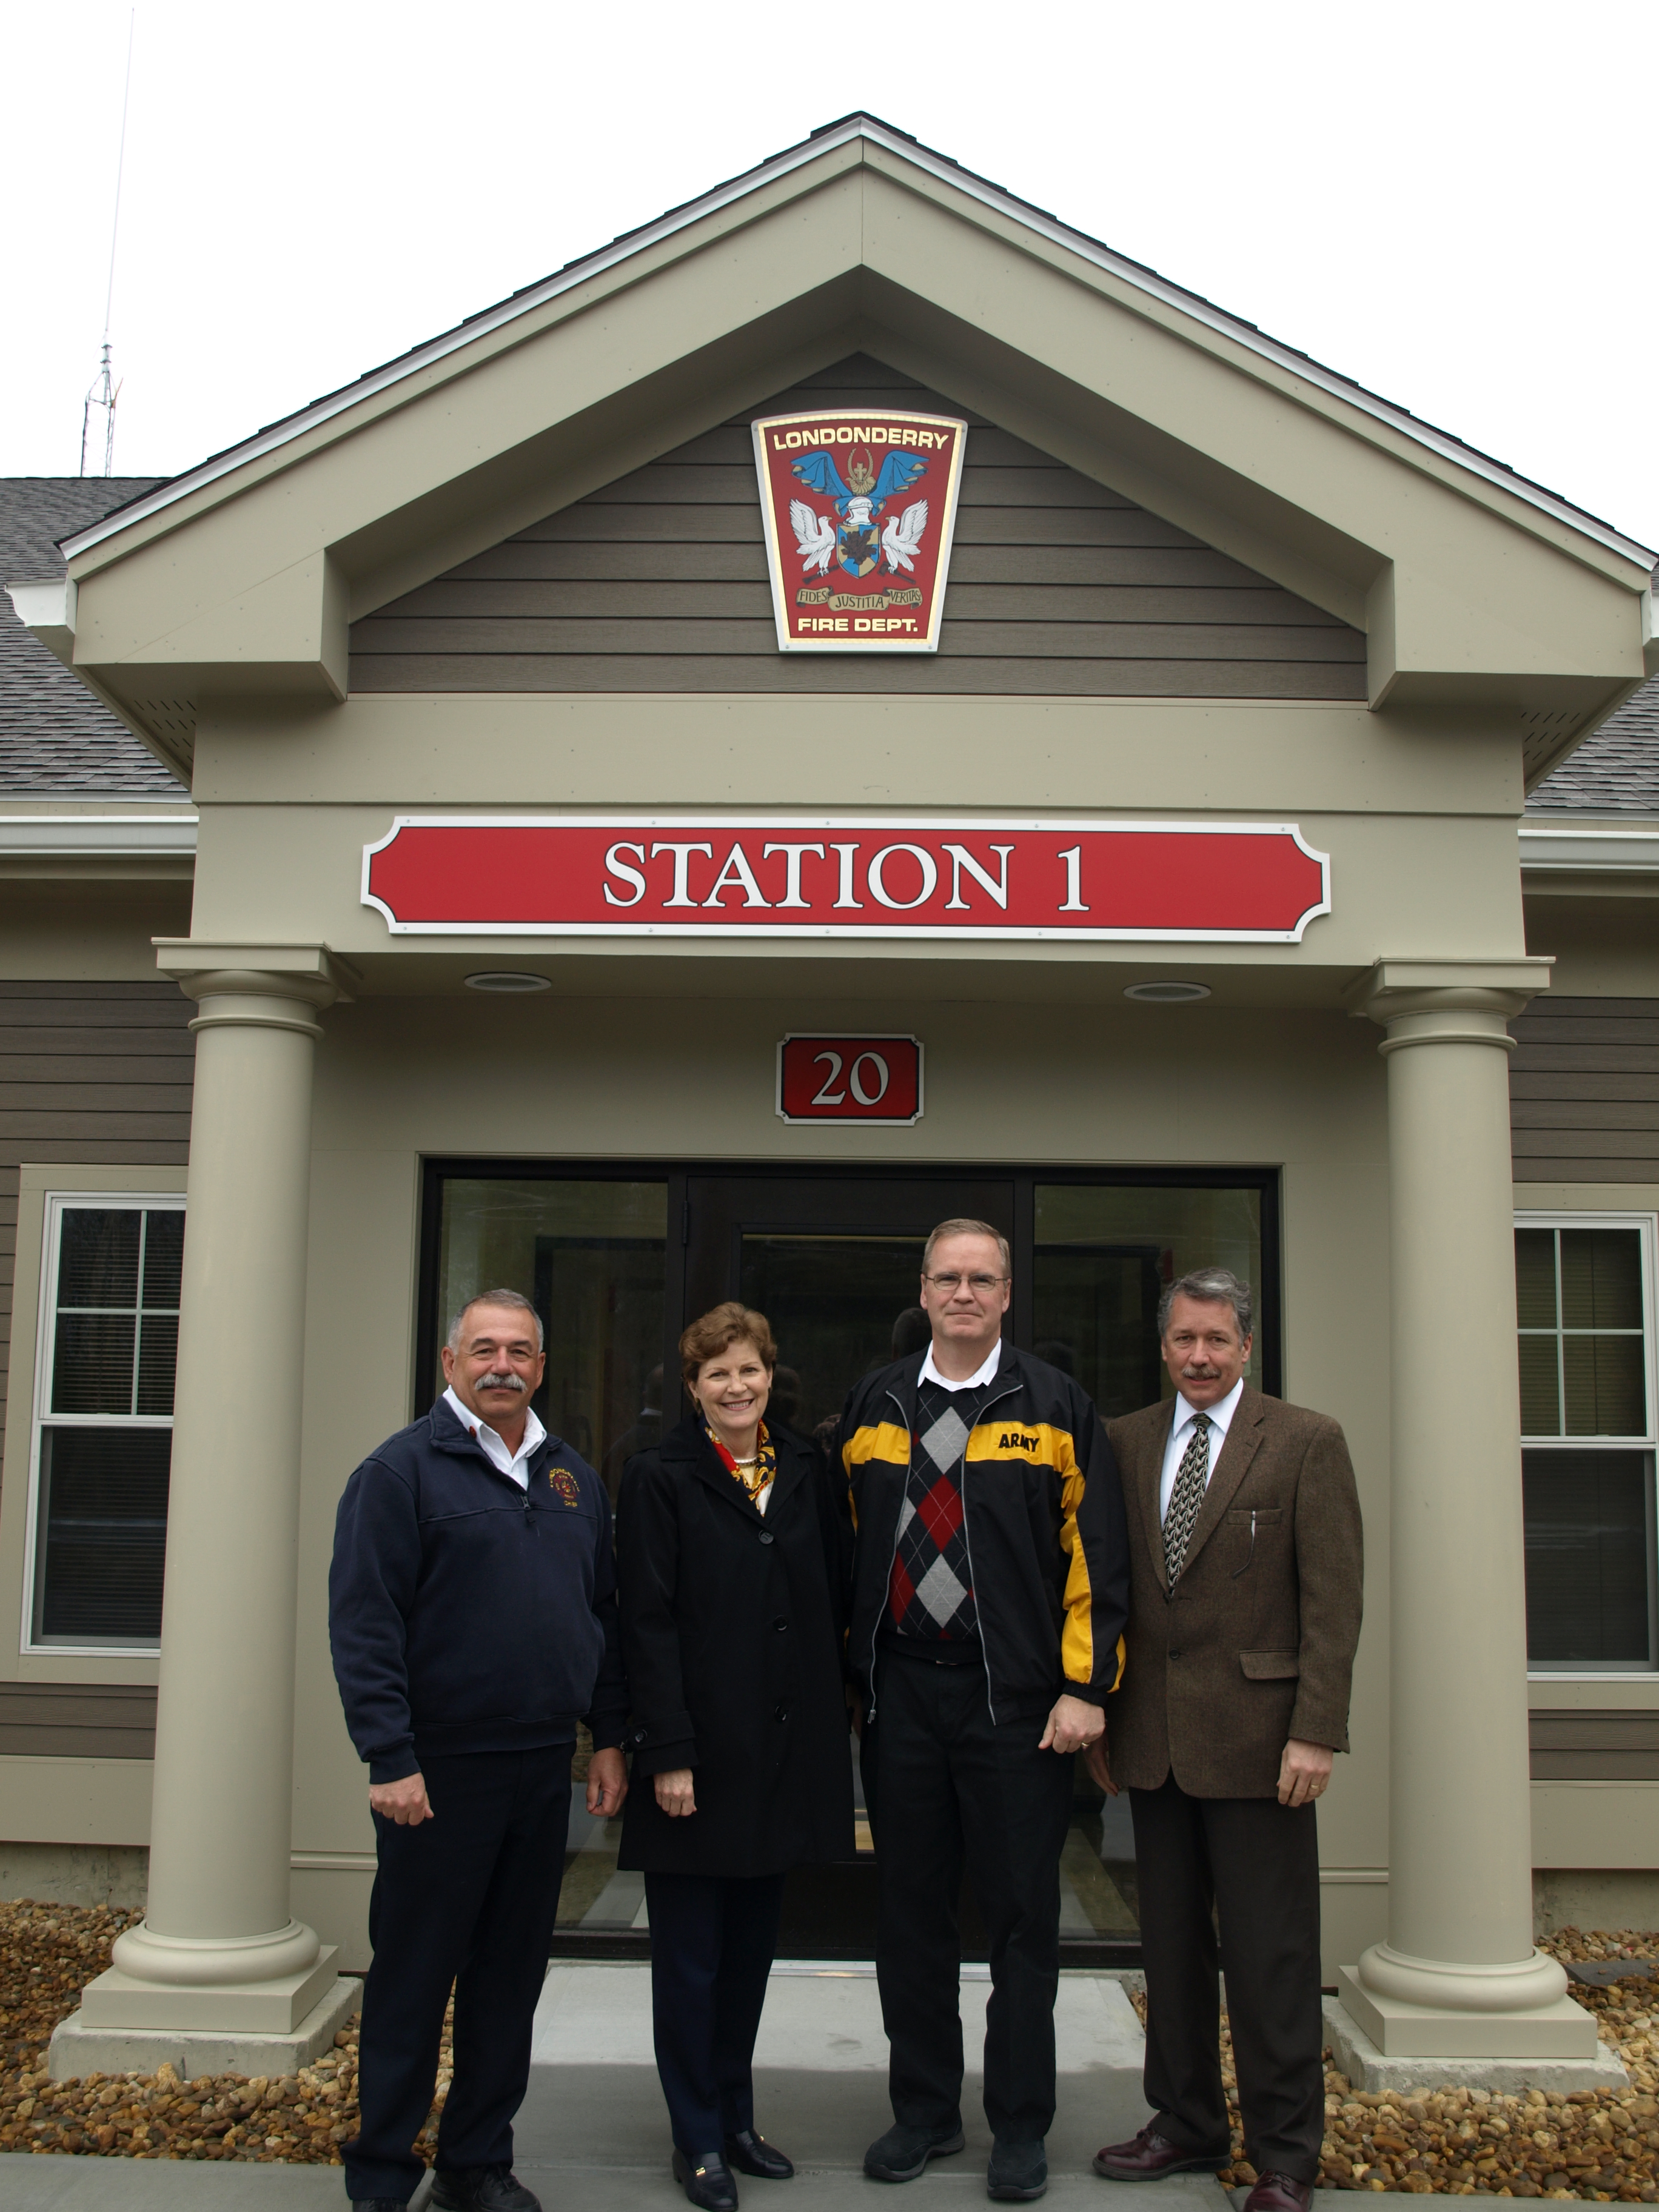 Shaheen with (left to right) Londonderry Fire Chief Kevin MacCaffrie, Town Councilor Tom Dolan, and Town Manager Dave Caron.